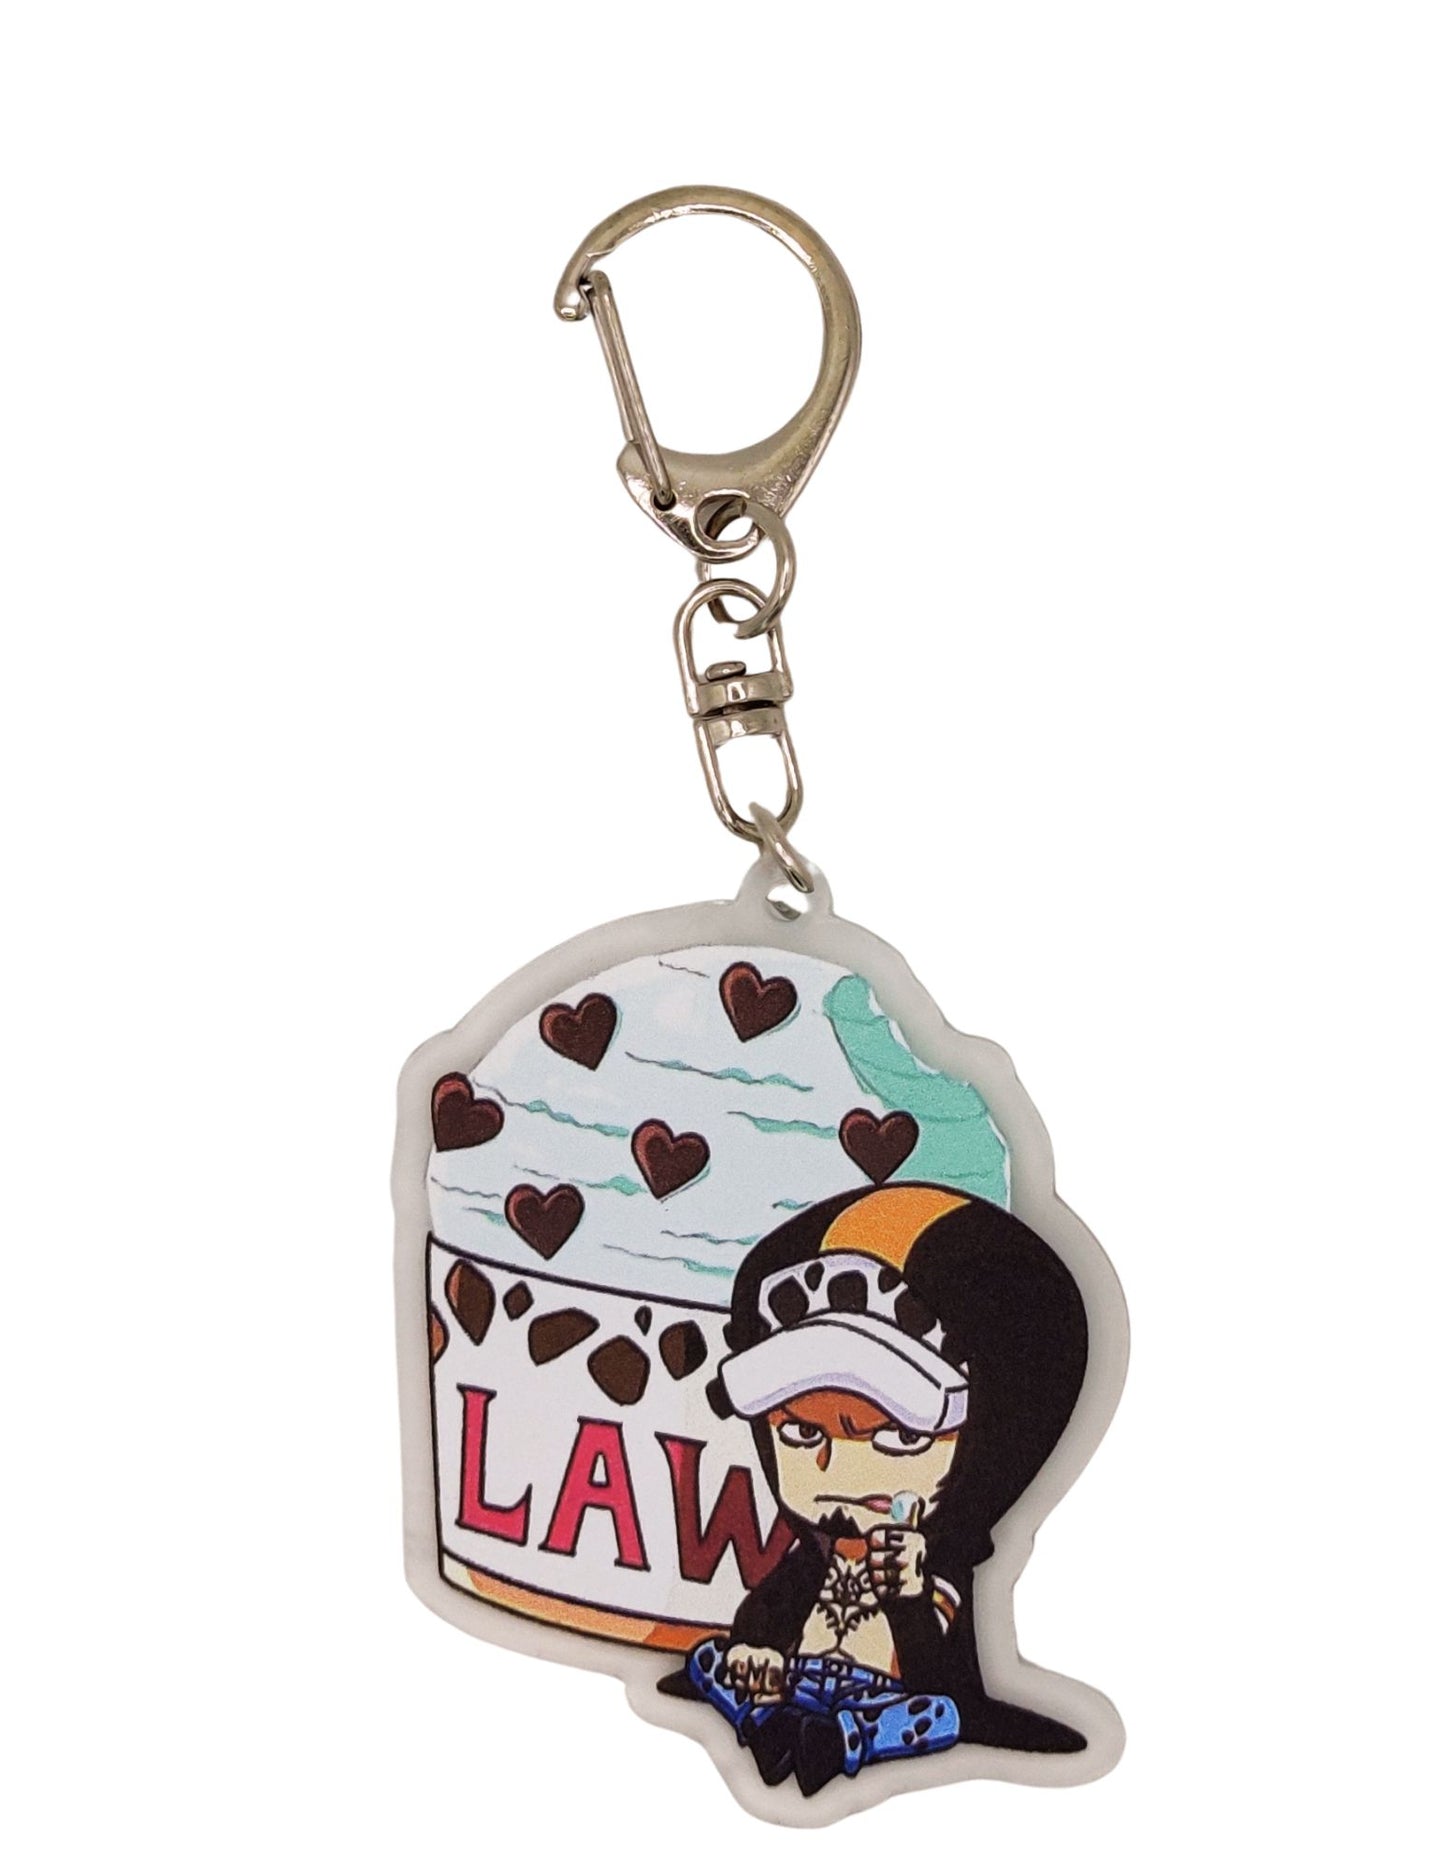 🔥One Piece Non-Straw Hat with Straw Hats Characters Acrylic Keychain🔥